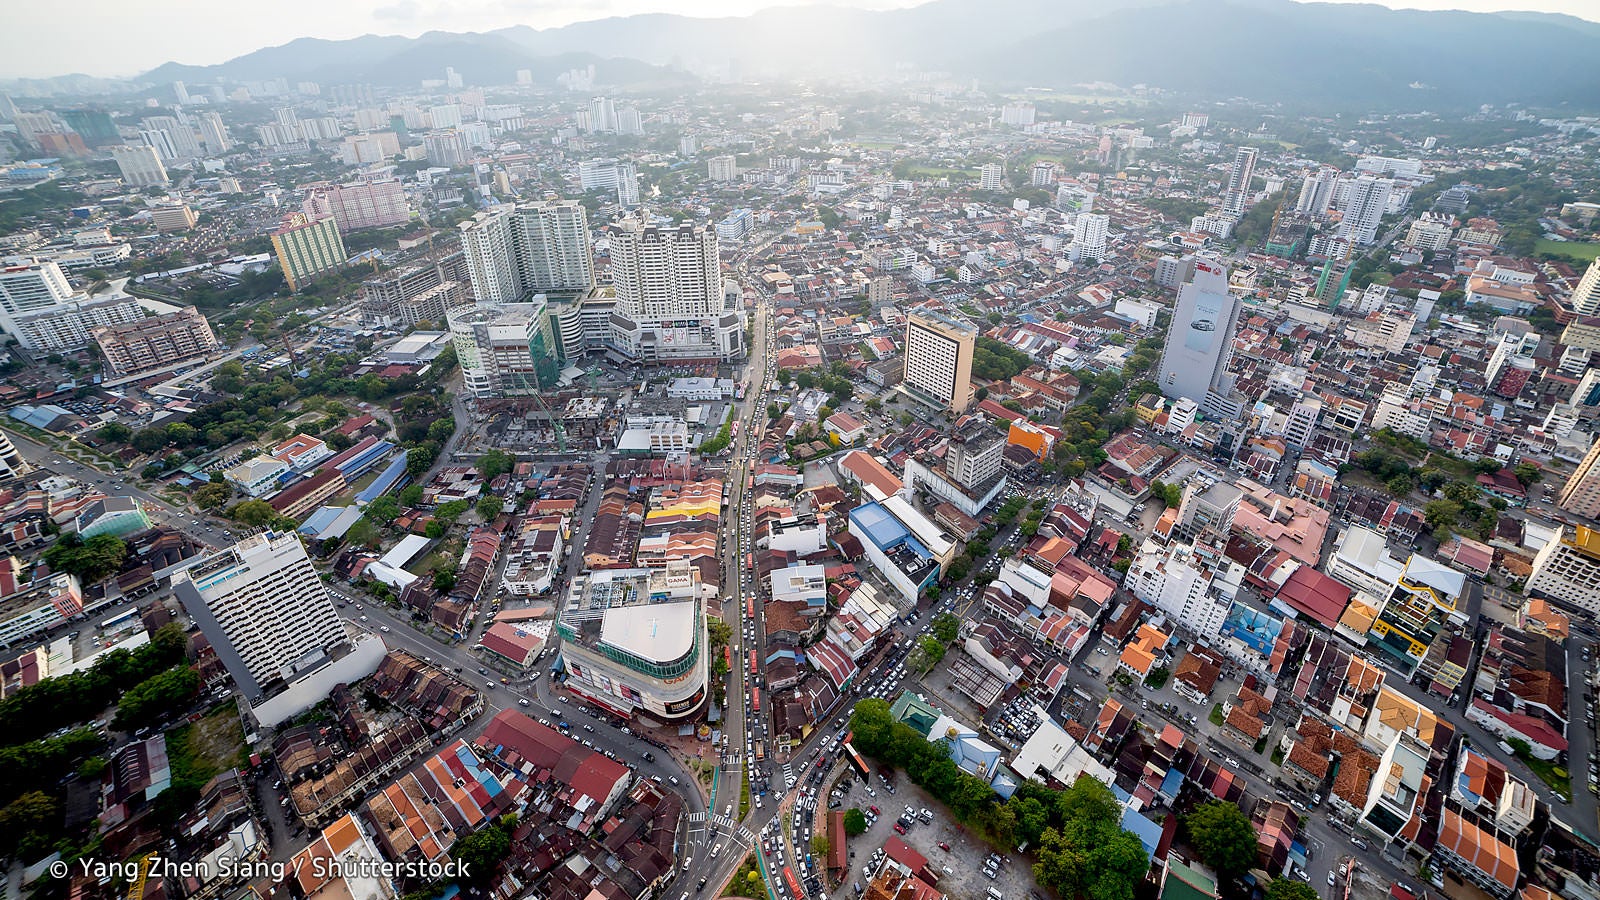 Penang Makes It to CNN Travel's Top Destinations Of 2019 - WORLD OF BUZZ 3